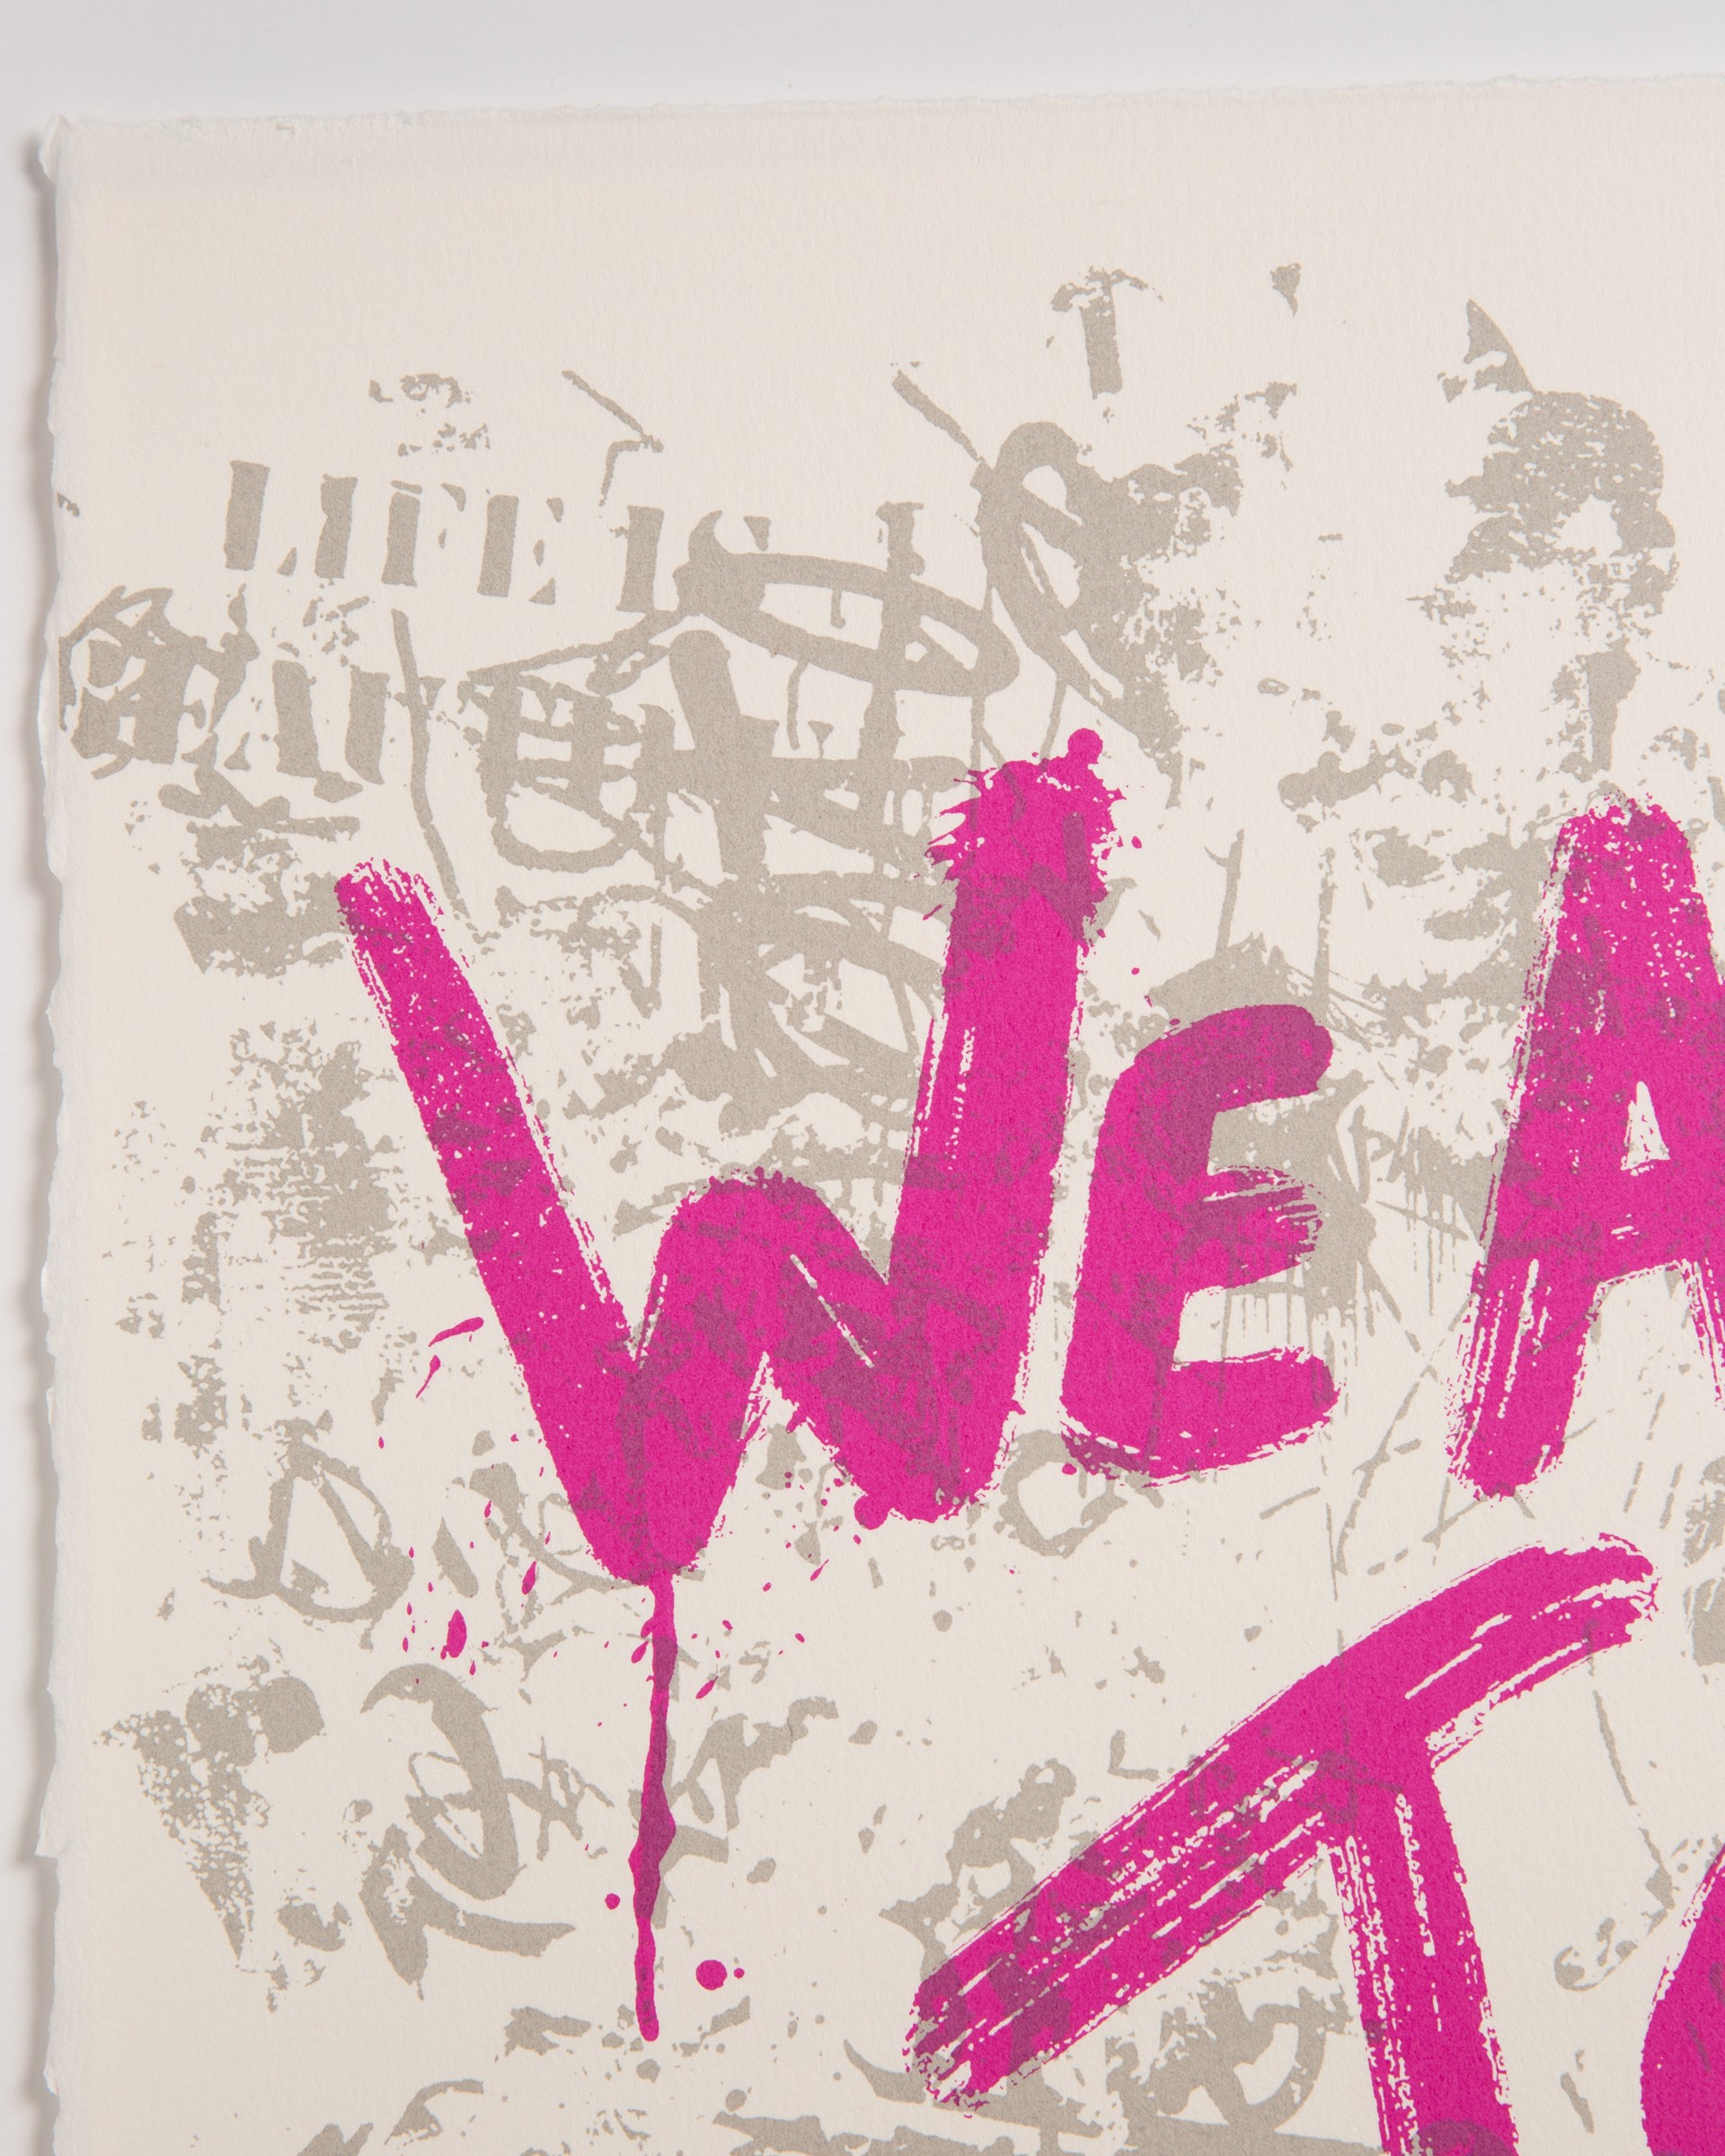 We are all in this together (Fuchsia) by Mr.Brainwash